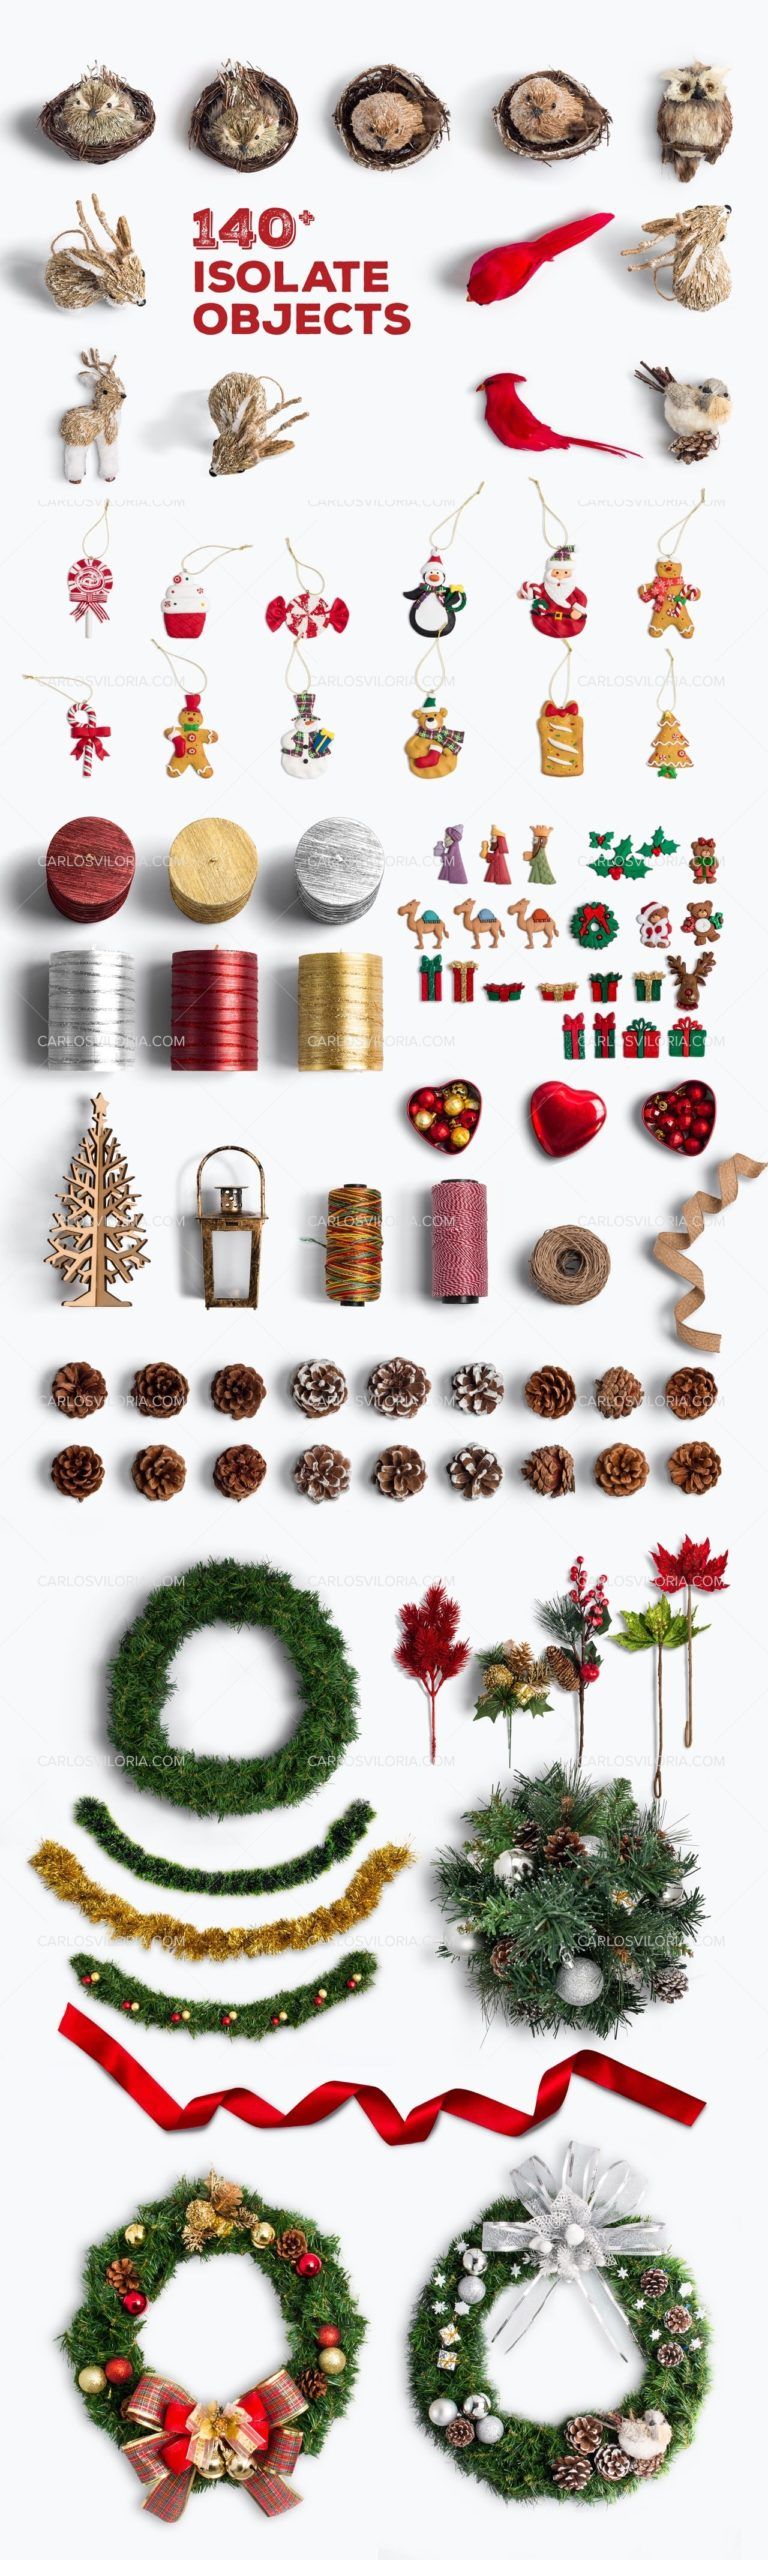 Isolated Christmas Objects by Carlos Viloria